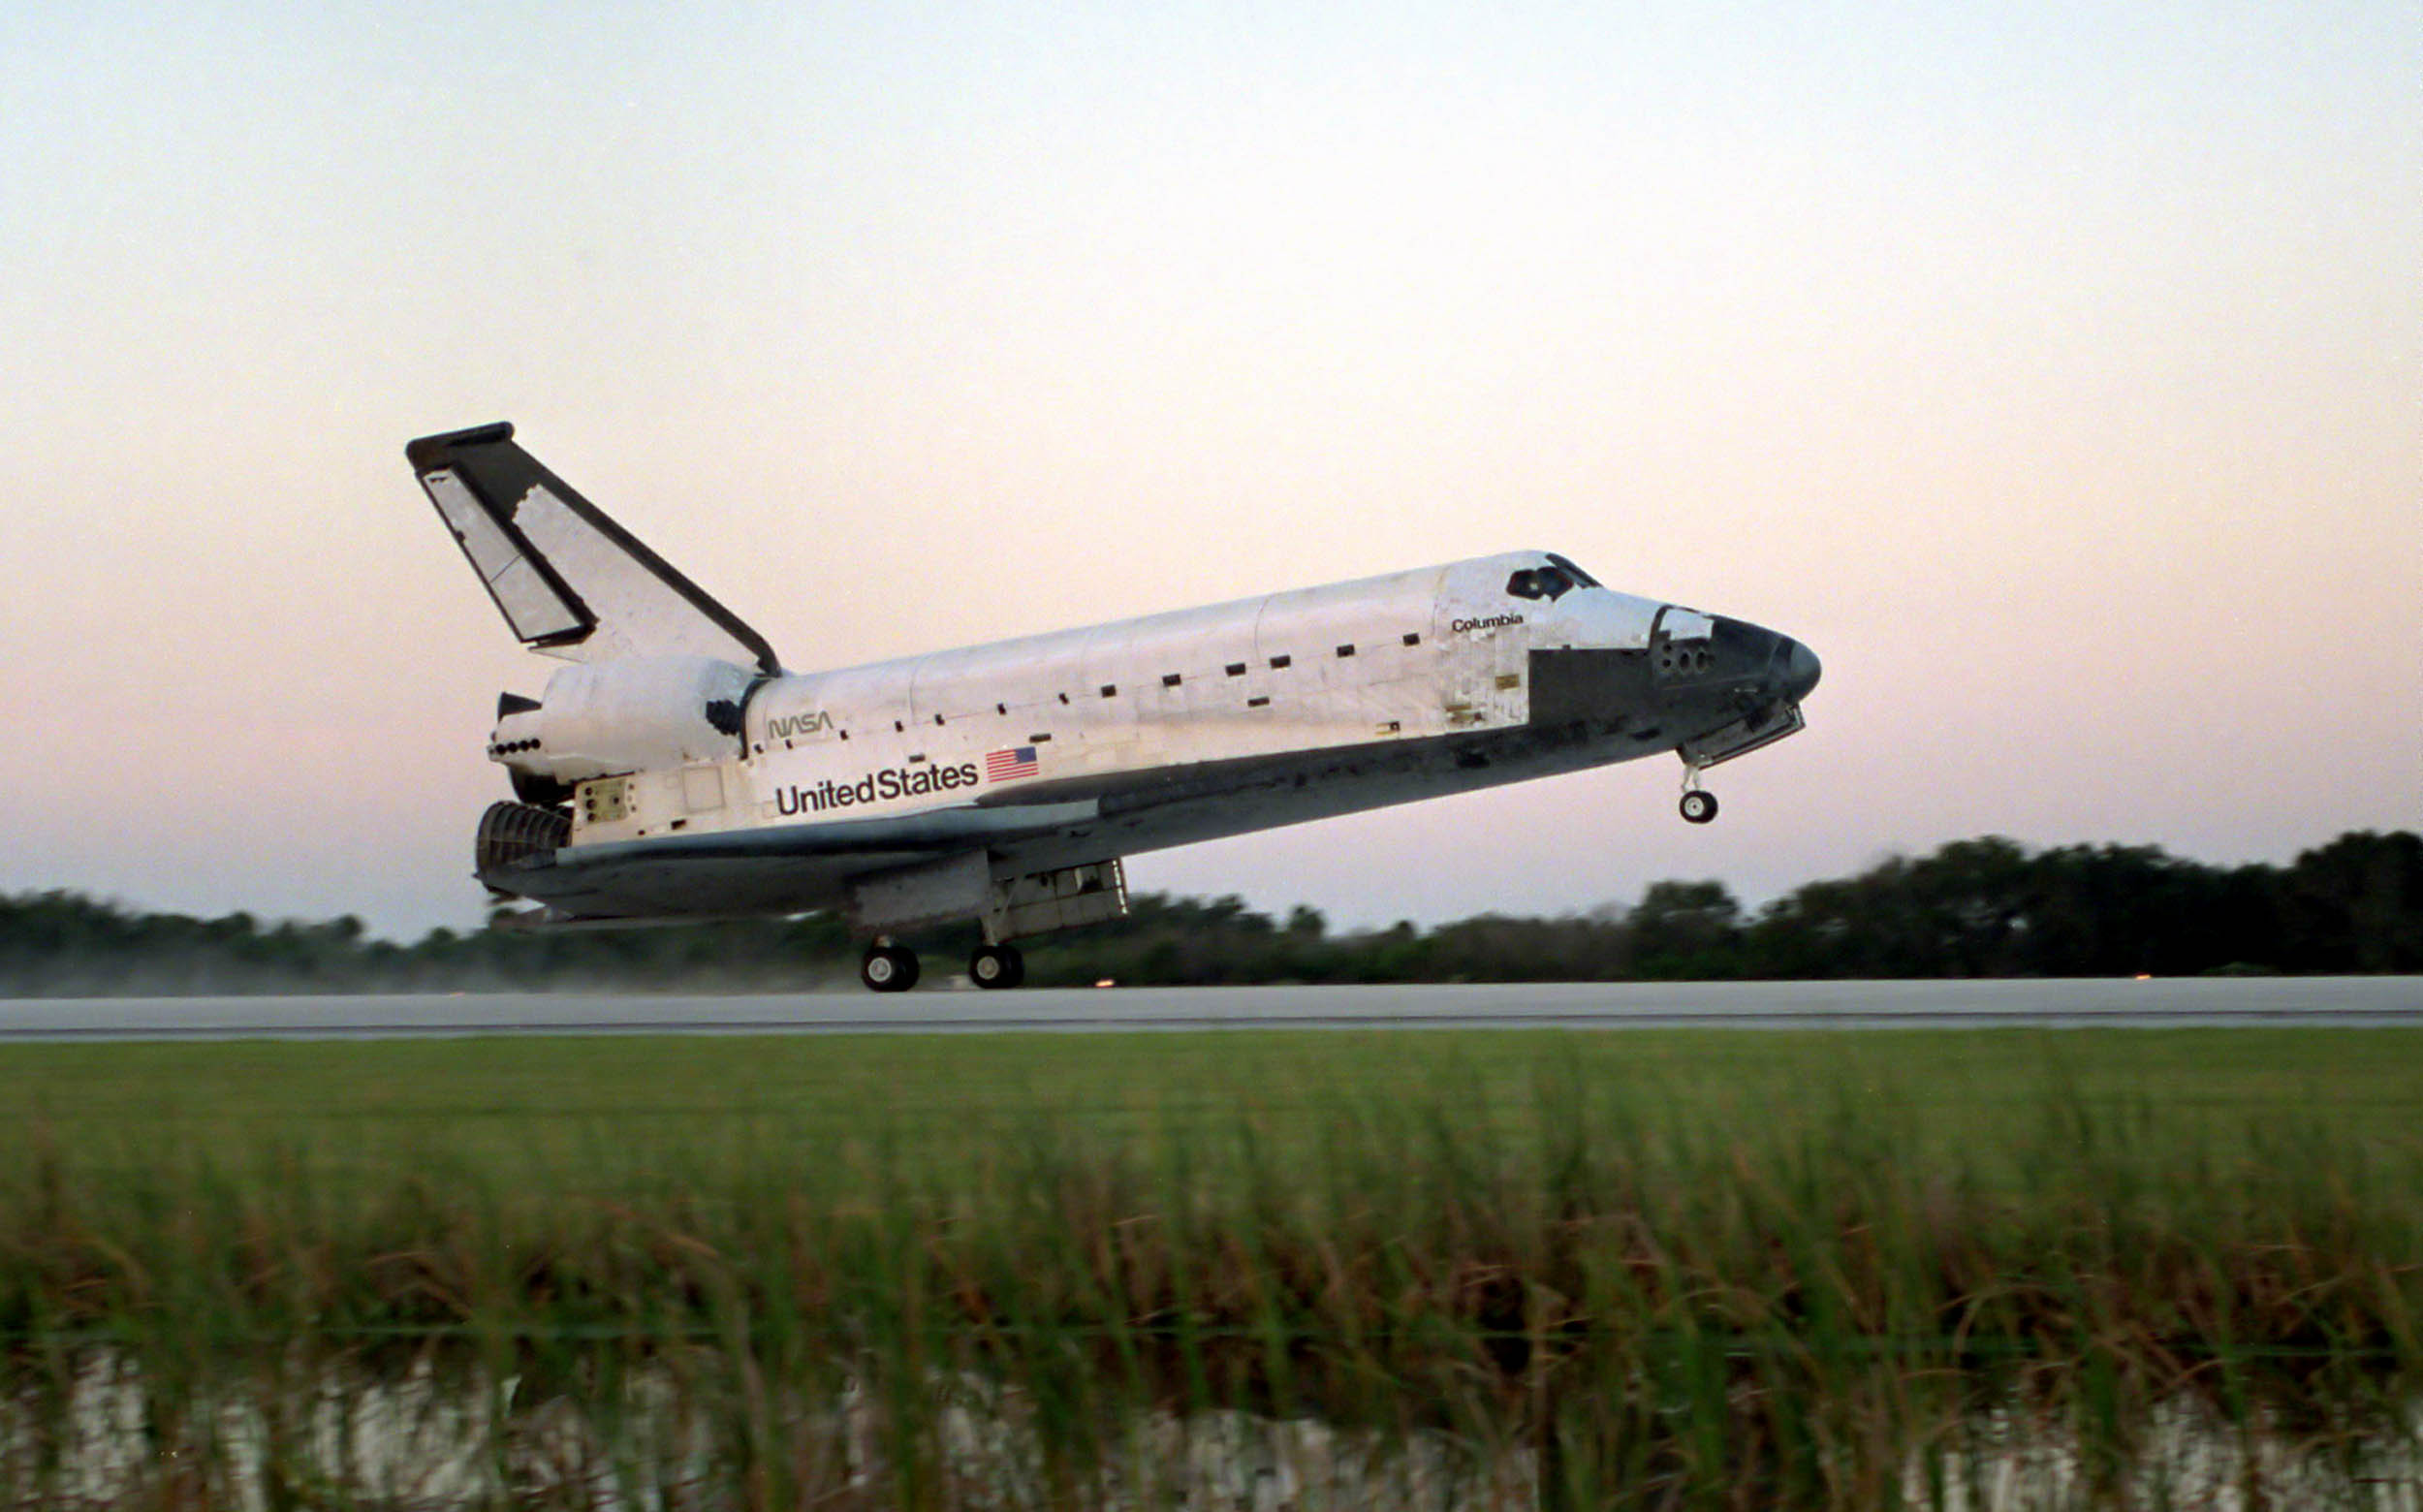 STS-73 landed 20 years ago today